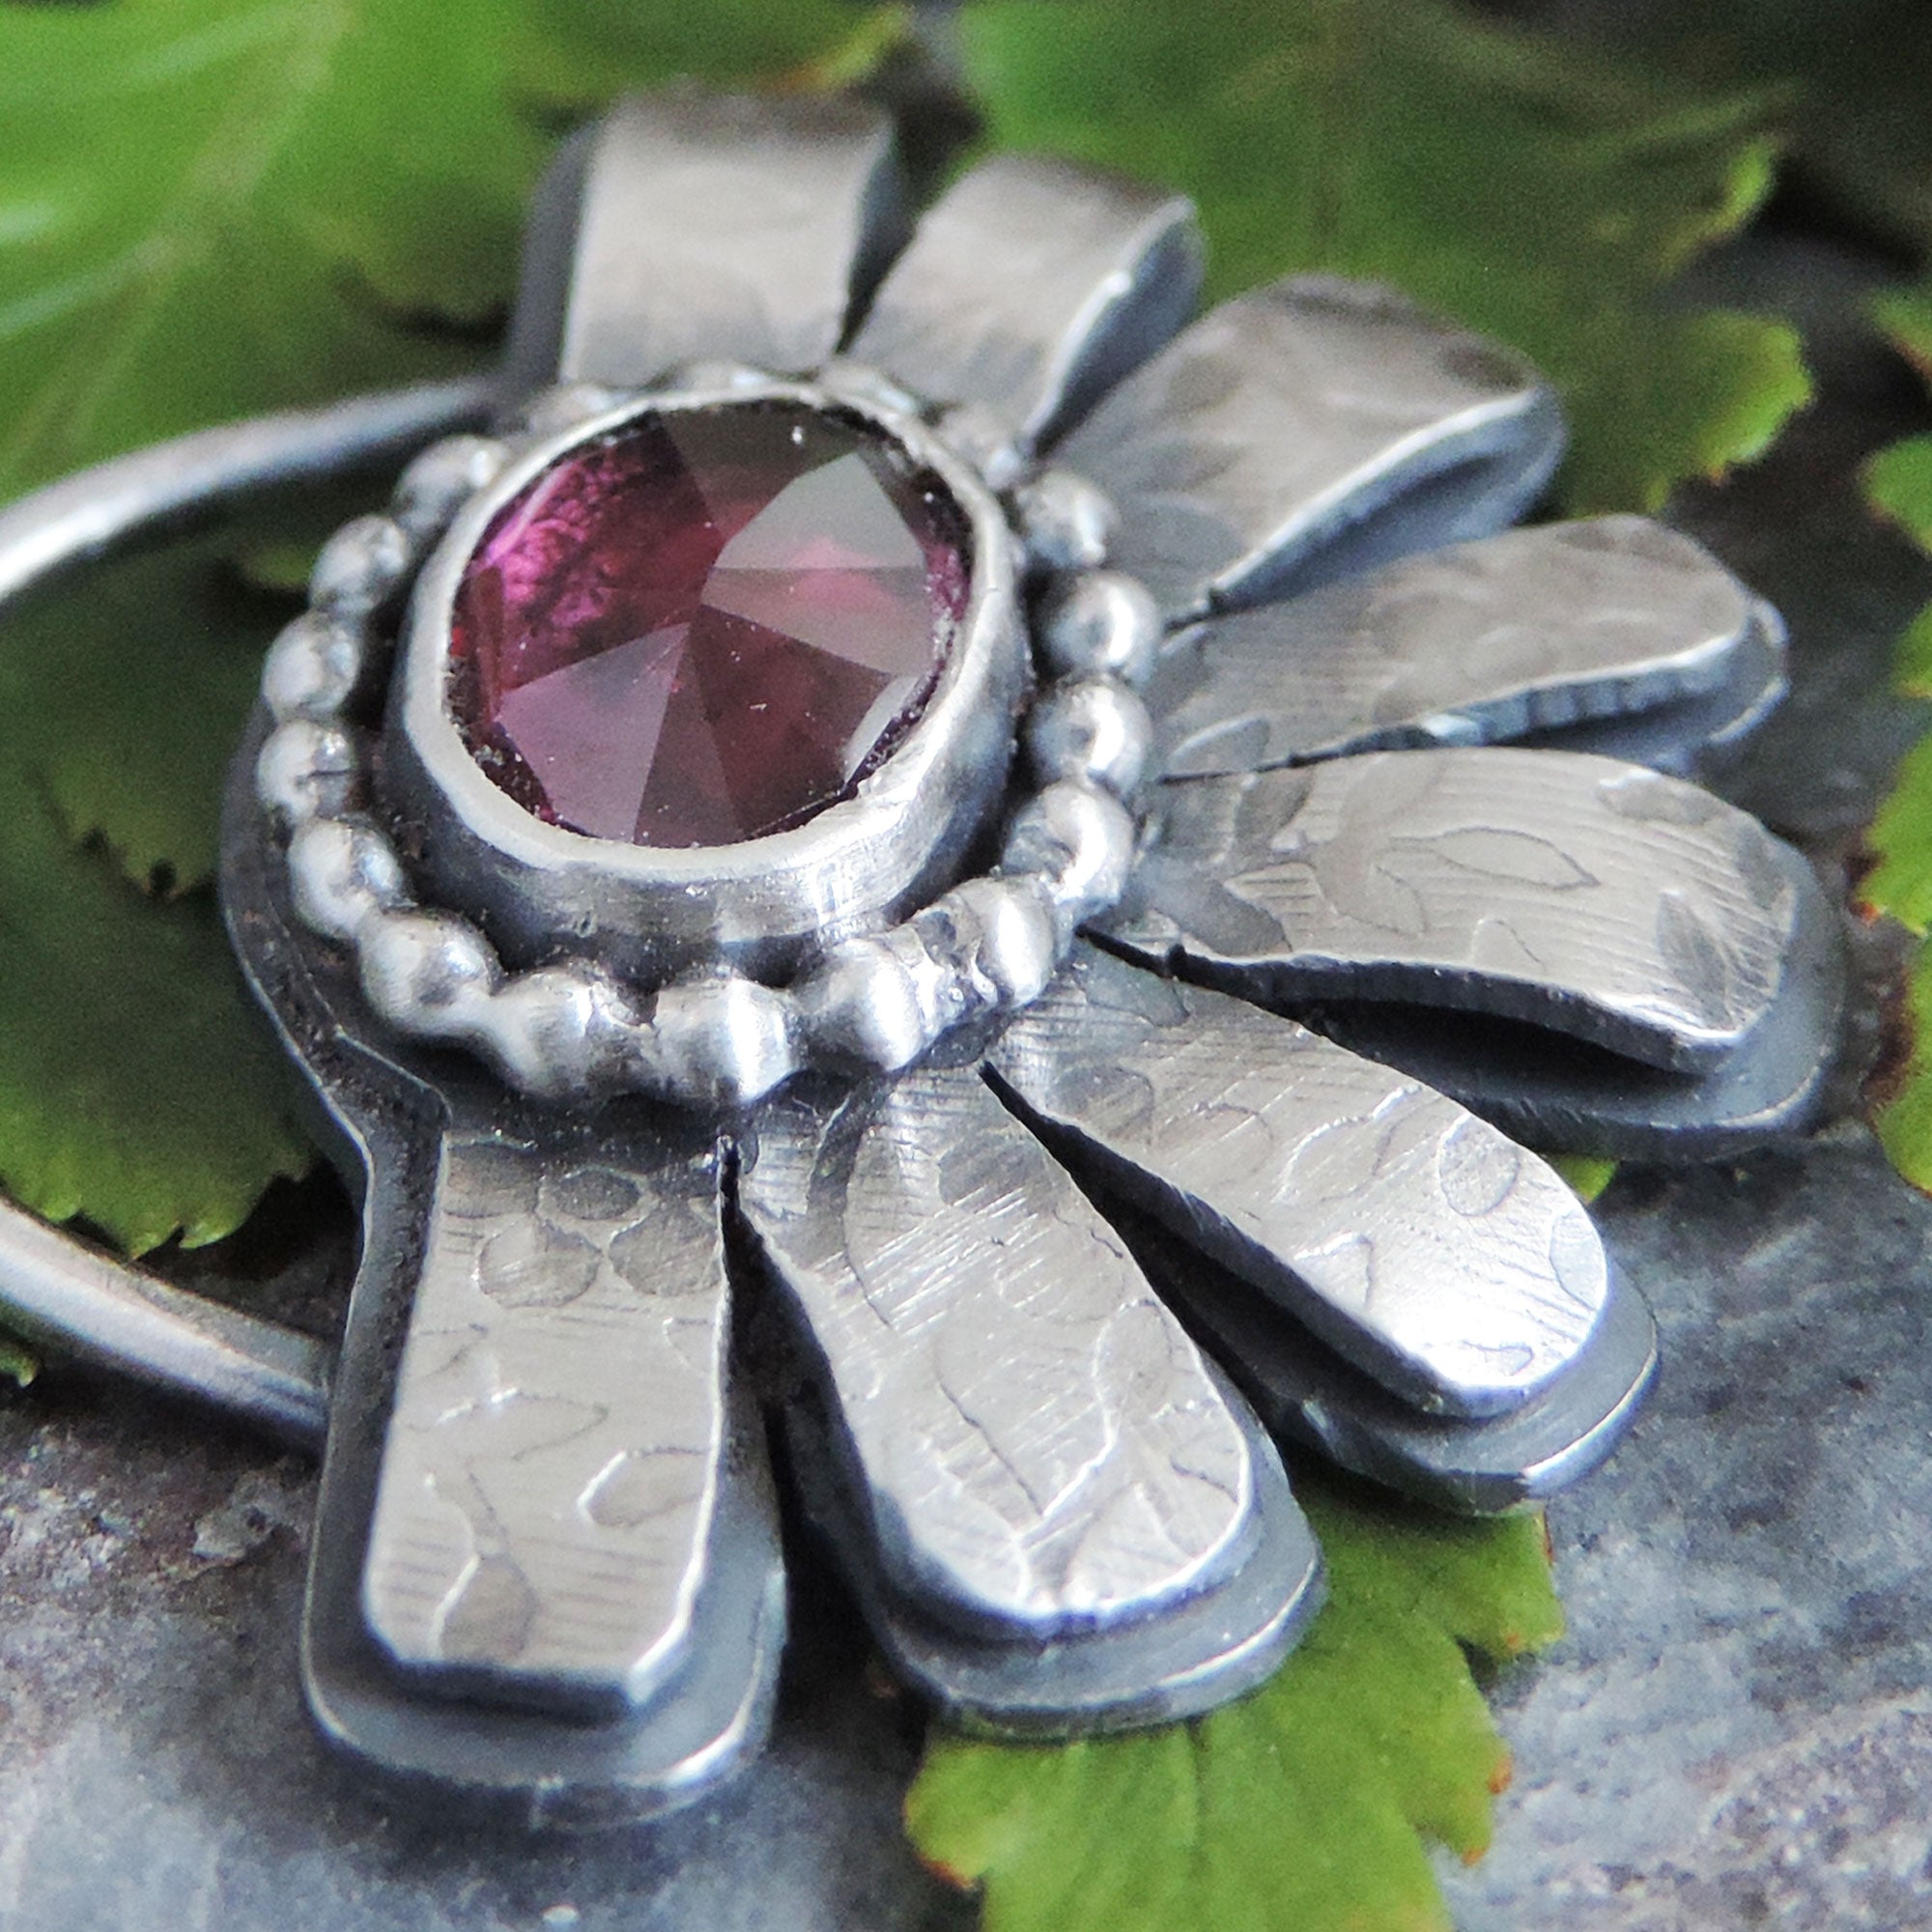 Pink Rhodolite Half Flower Pendant Necklace - A Twist of Whimsy